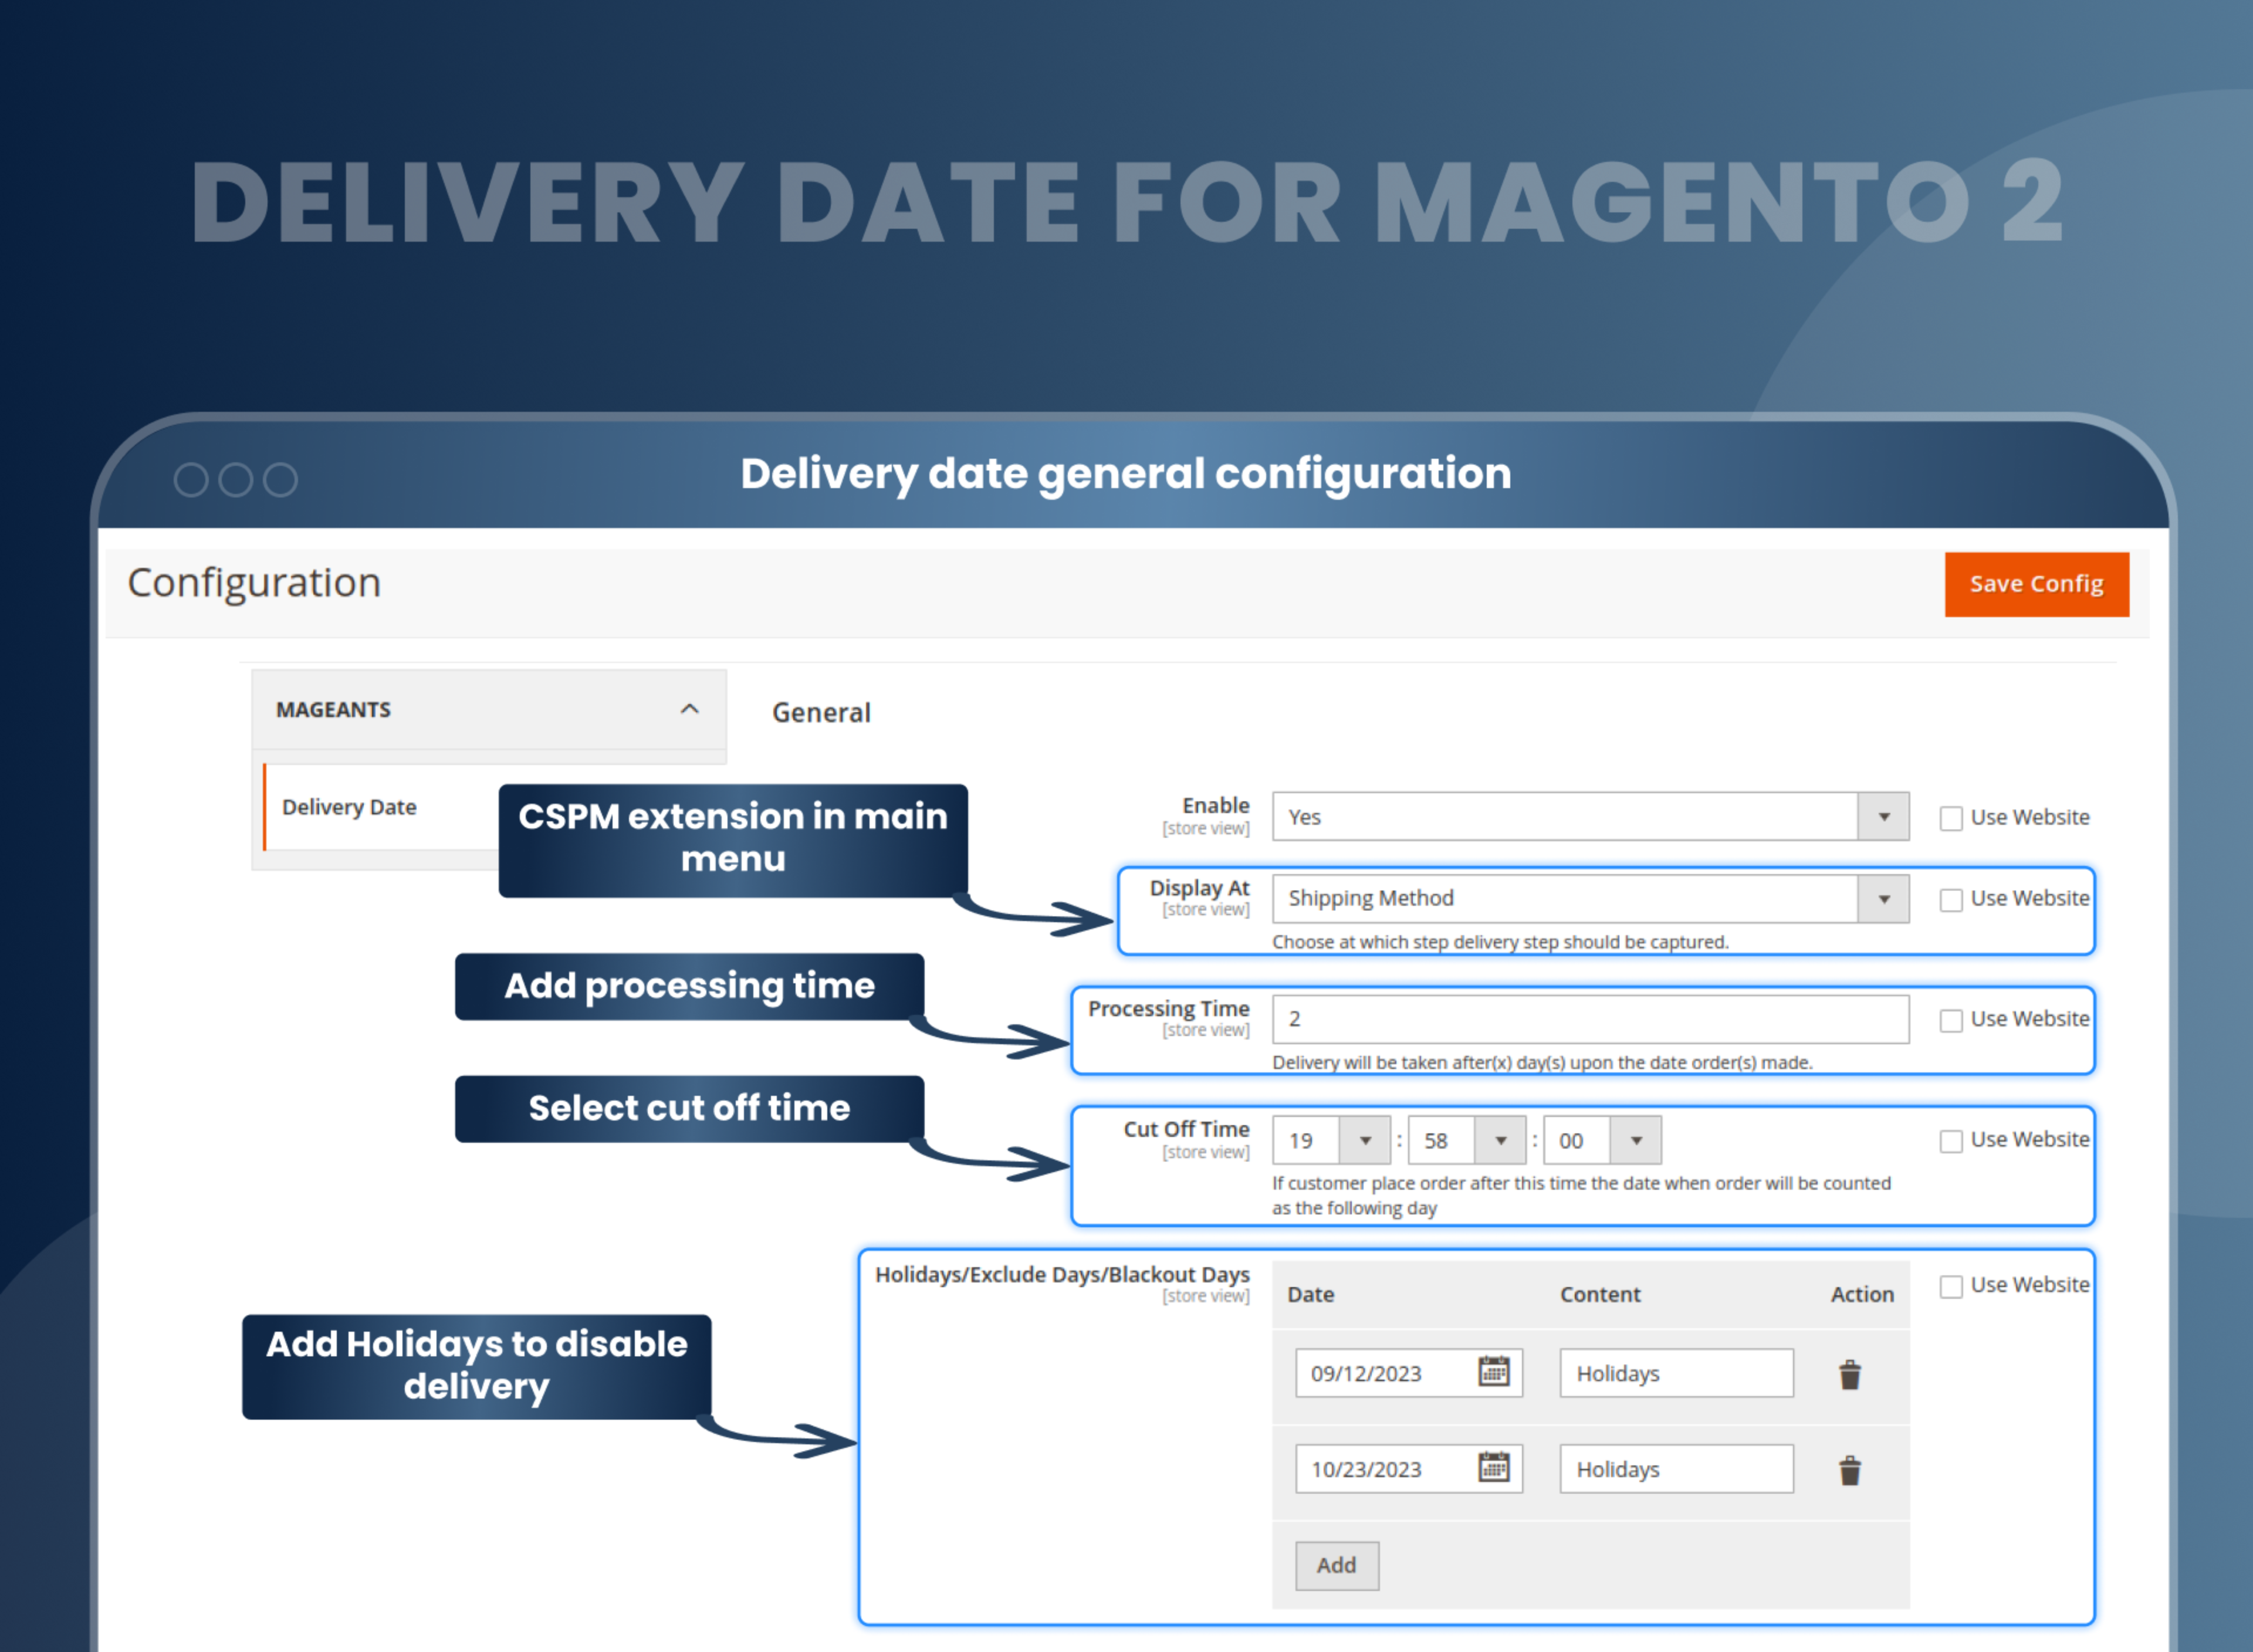 Delivery date general configuration